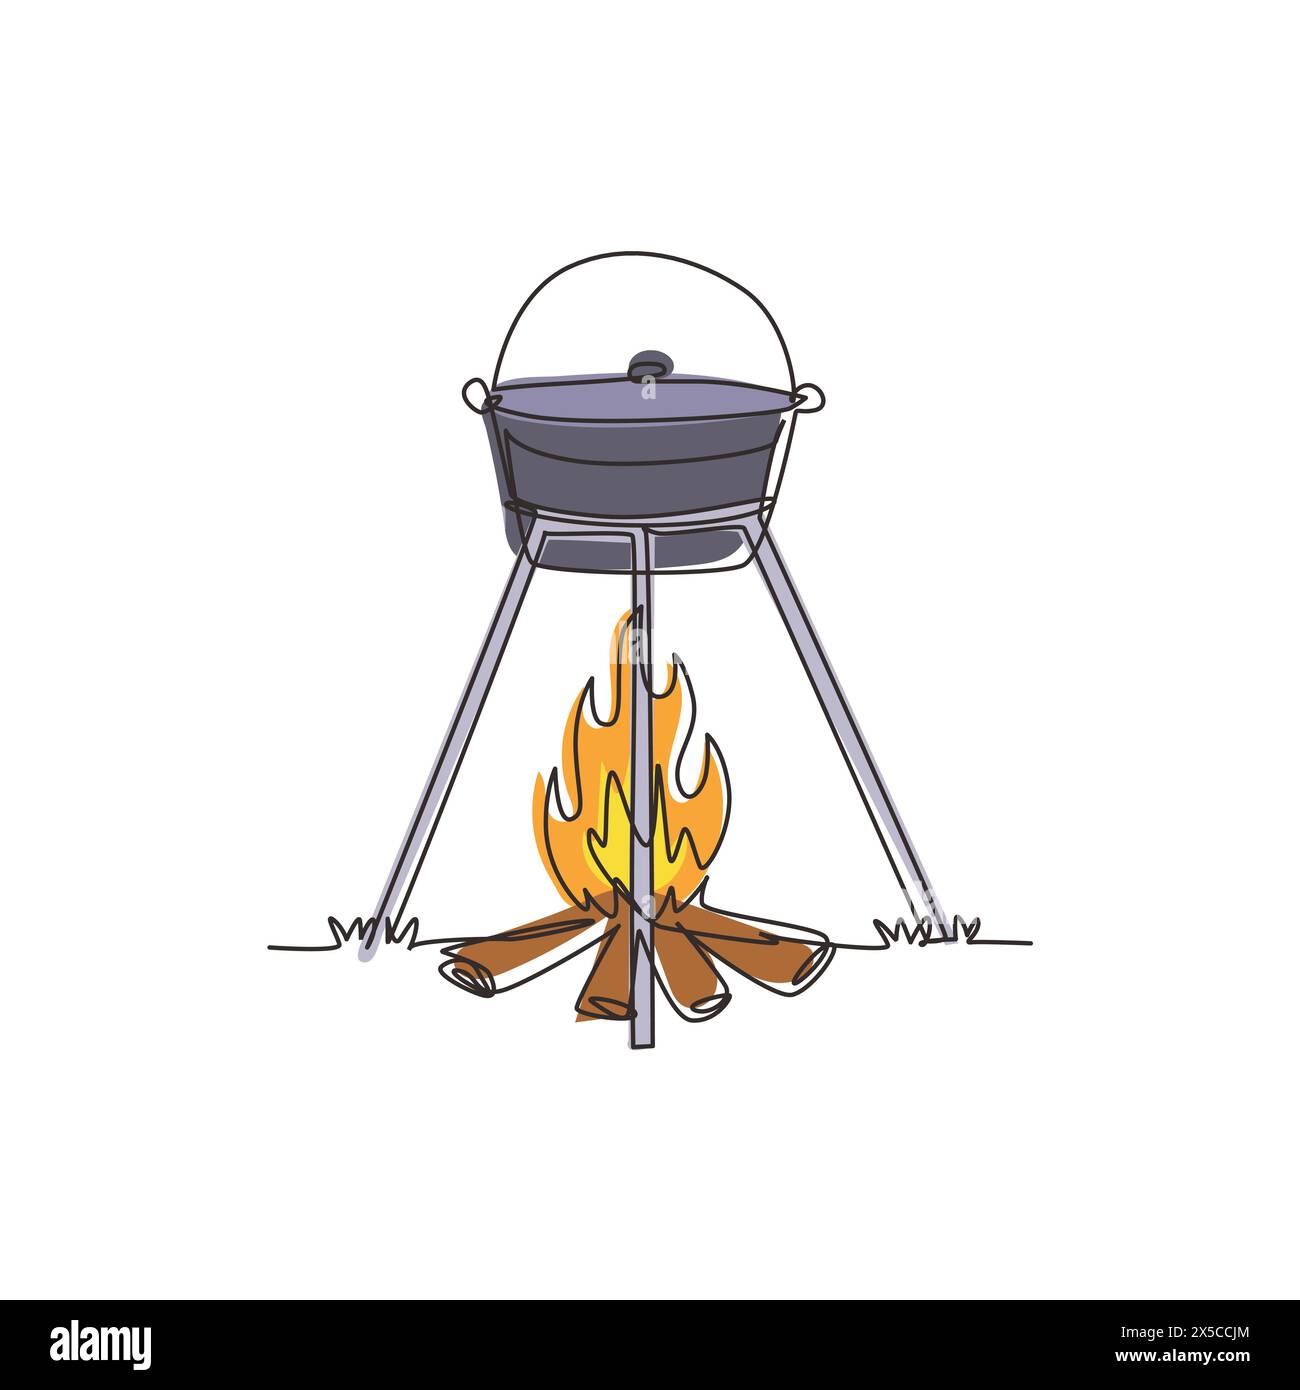 Single one line drawing cooking dinner in camping pot over bonfire. Cauldron and campfire. Outdoor grass, branch, stones. outdoor nature picnic. Conti Stock Vector